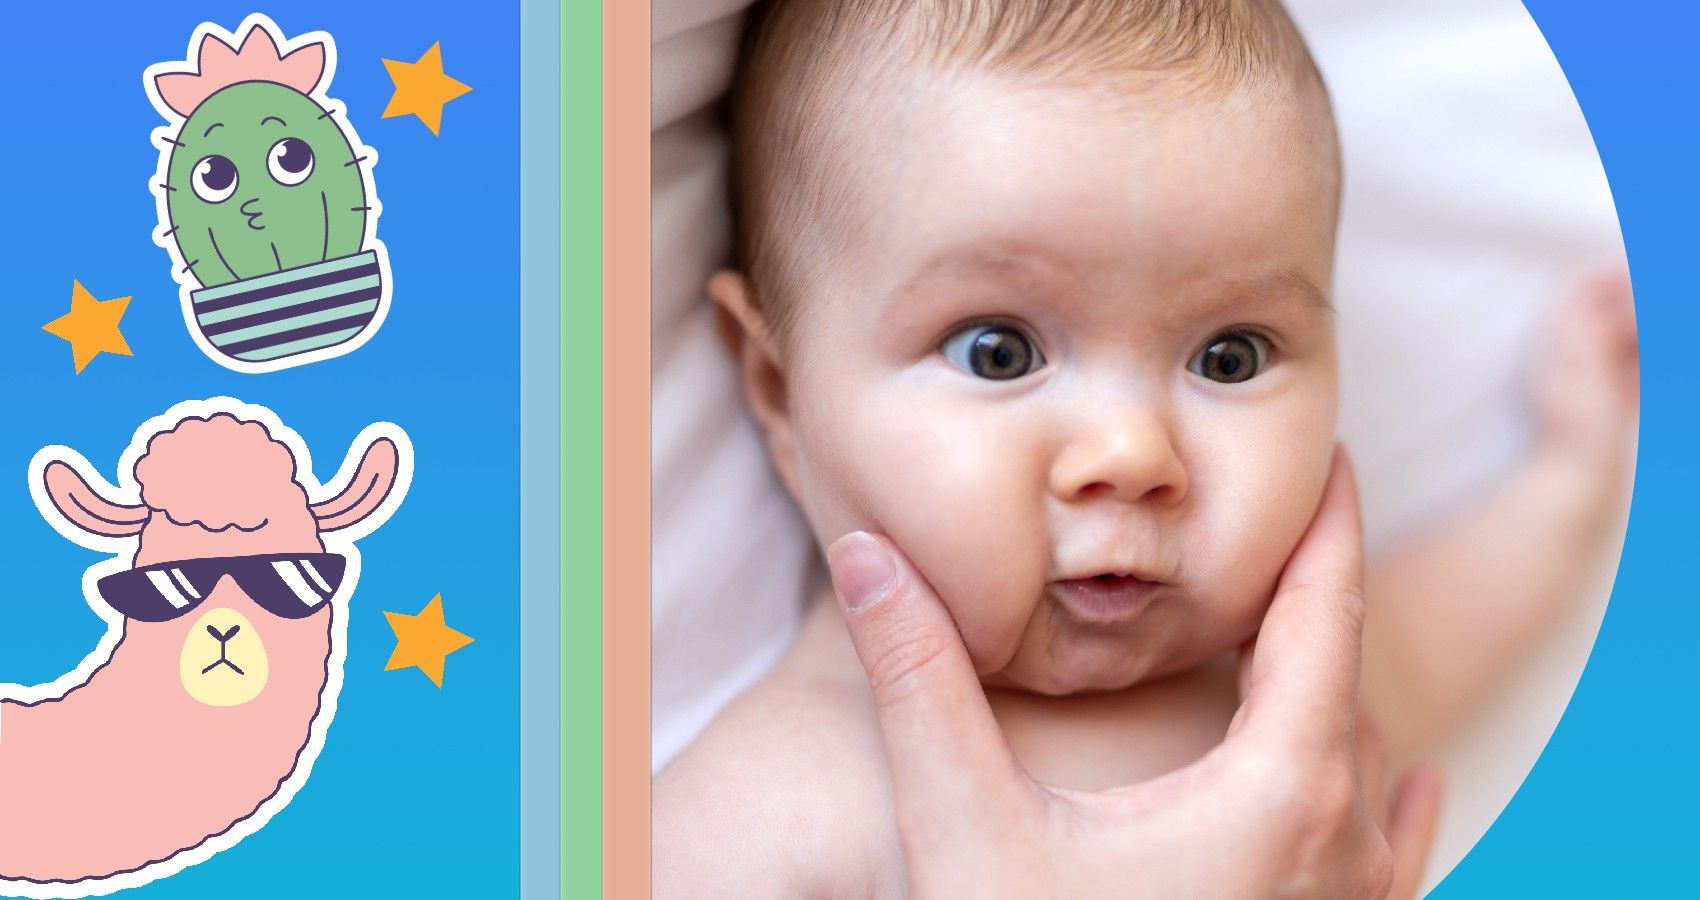 The Science Behind Wanting To Squeeze Cute Babies